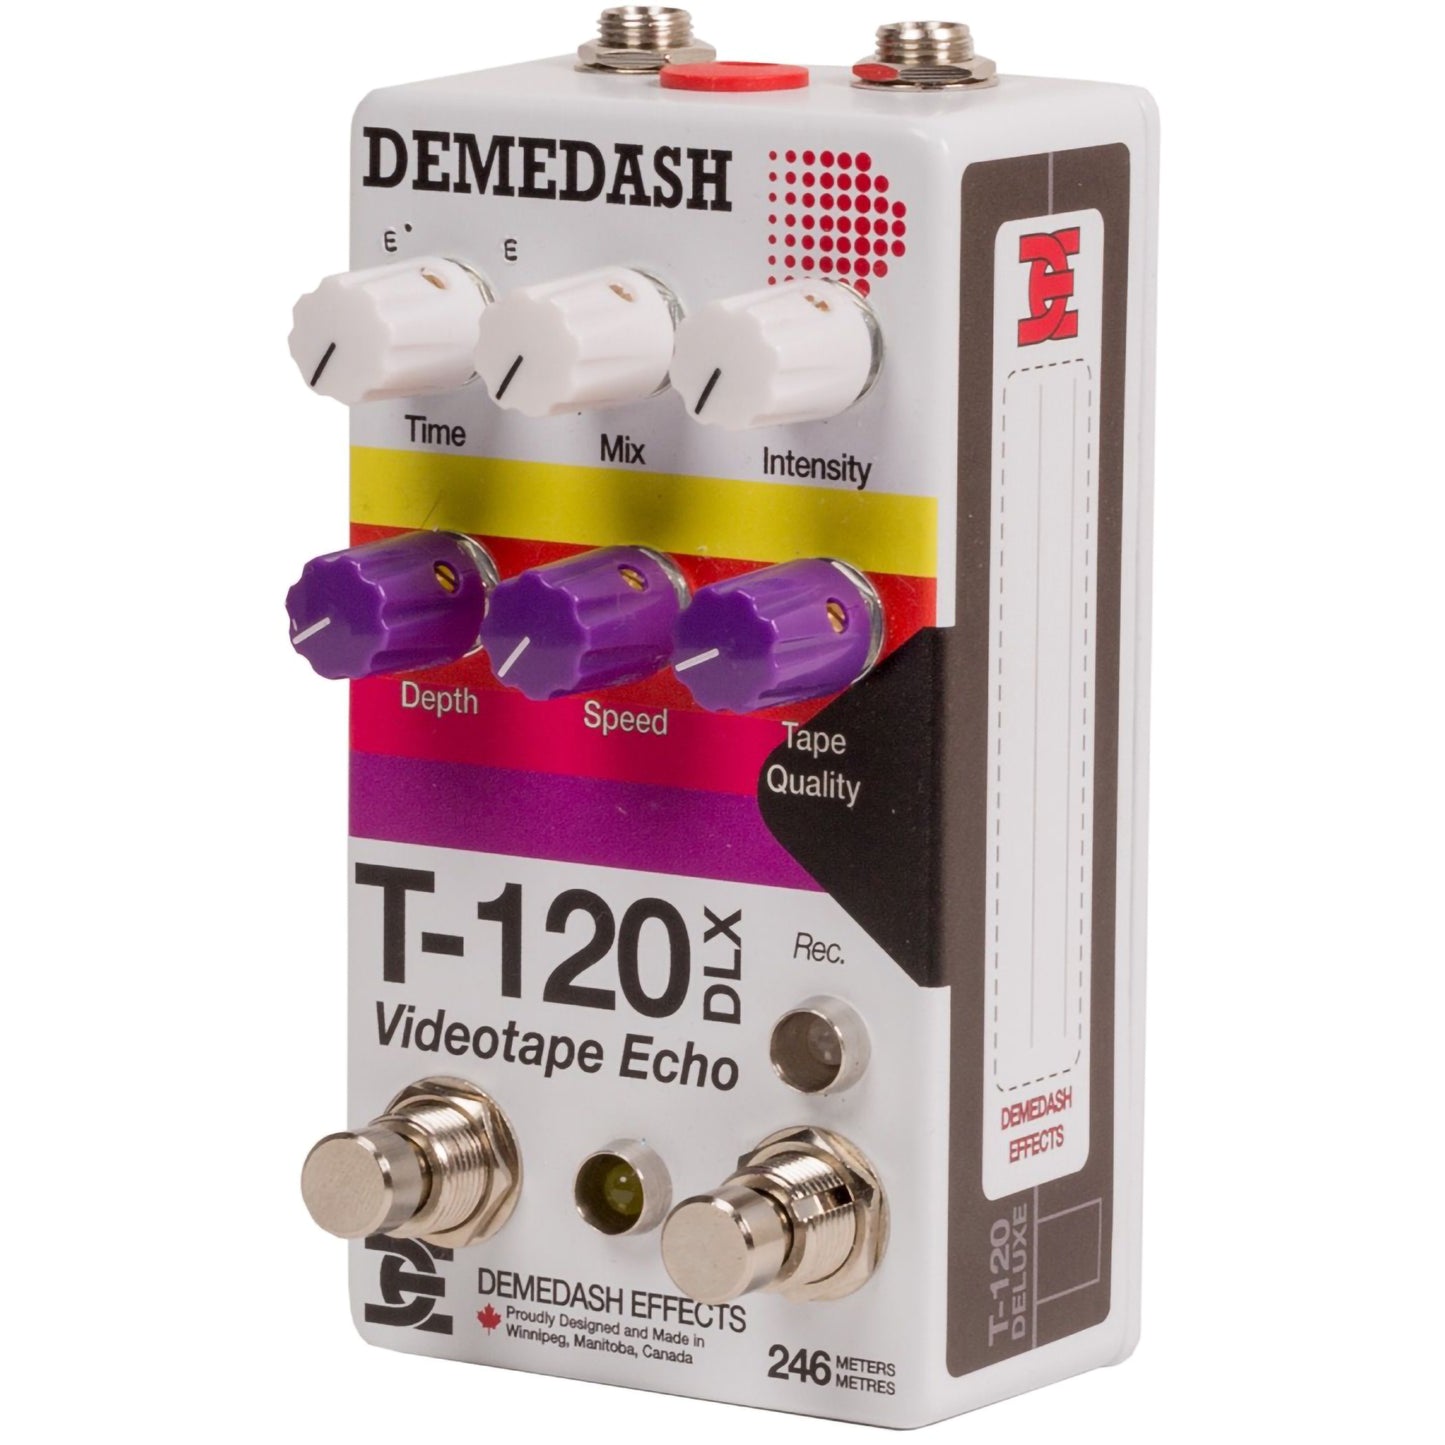 Demadash Effects T-120 Deluxe V2 Pedal